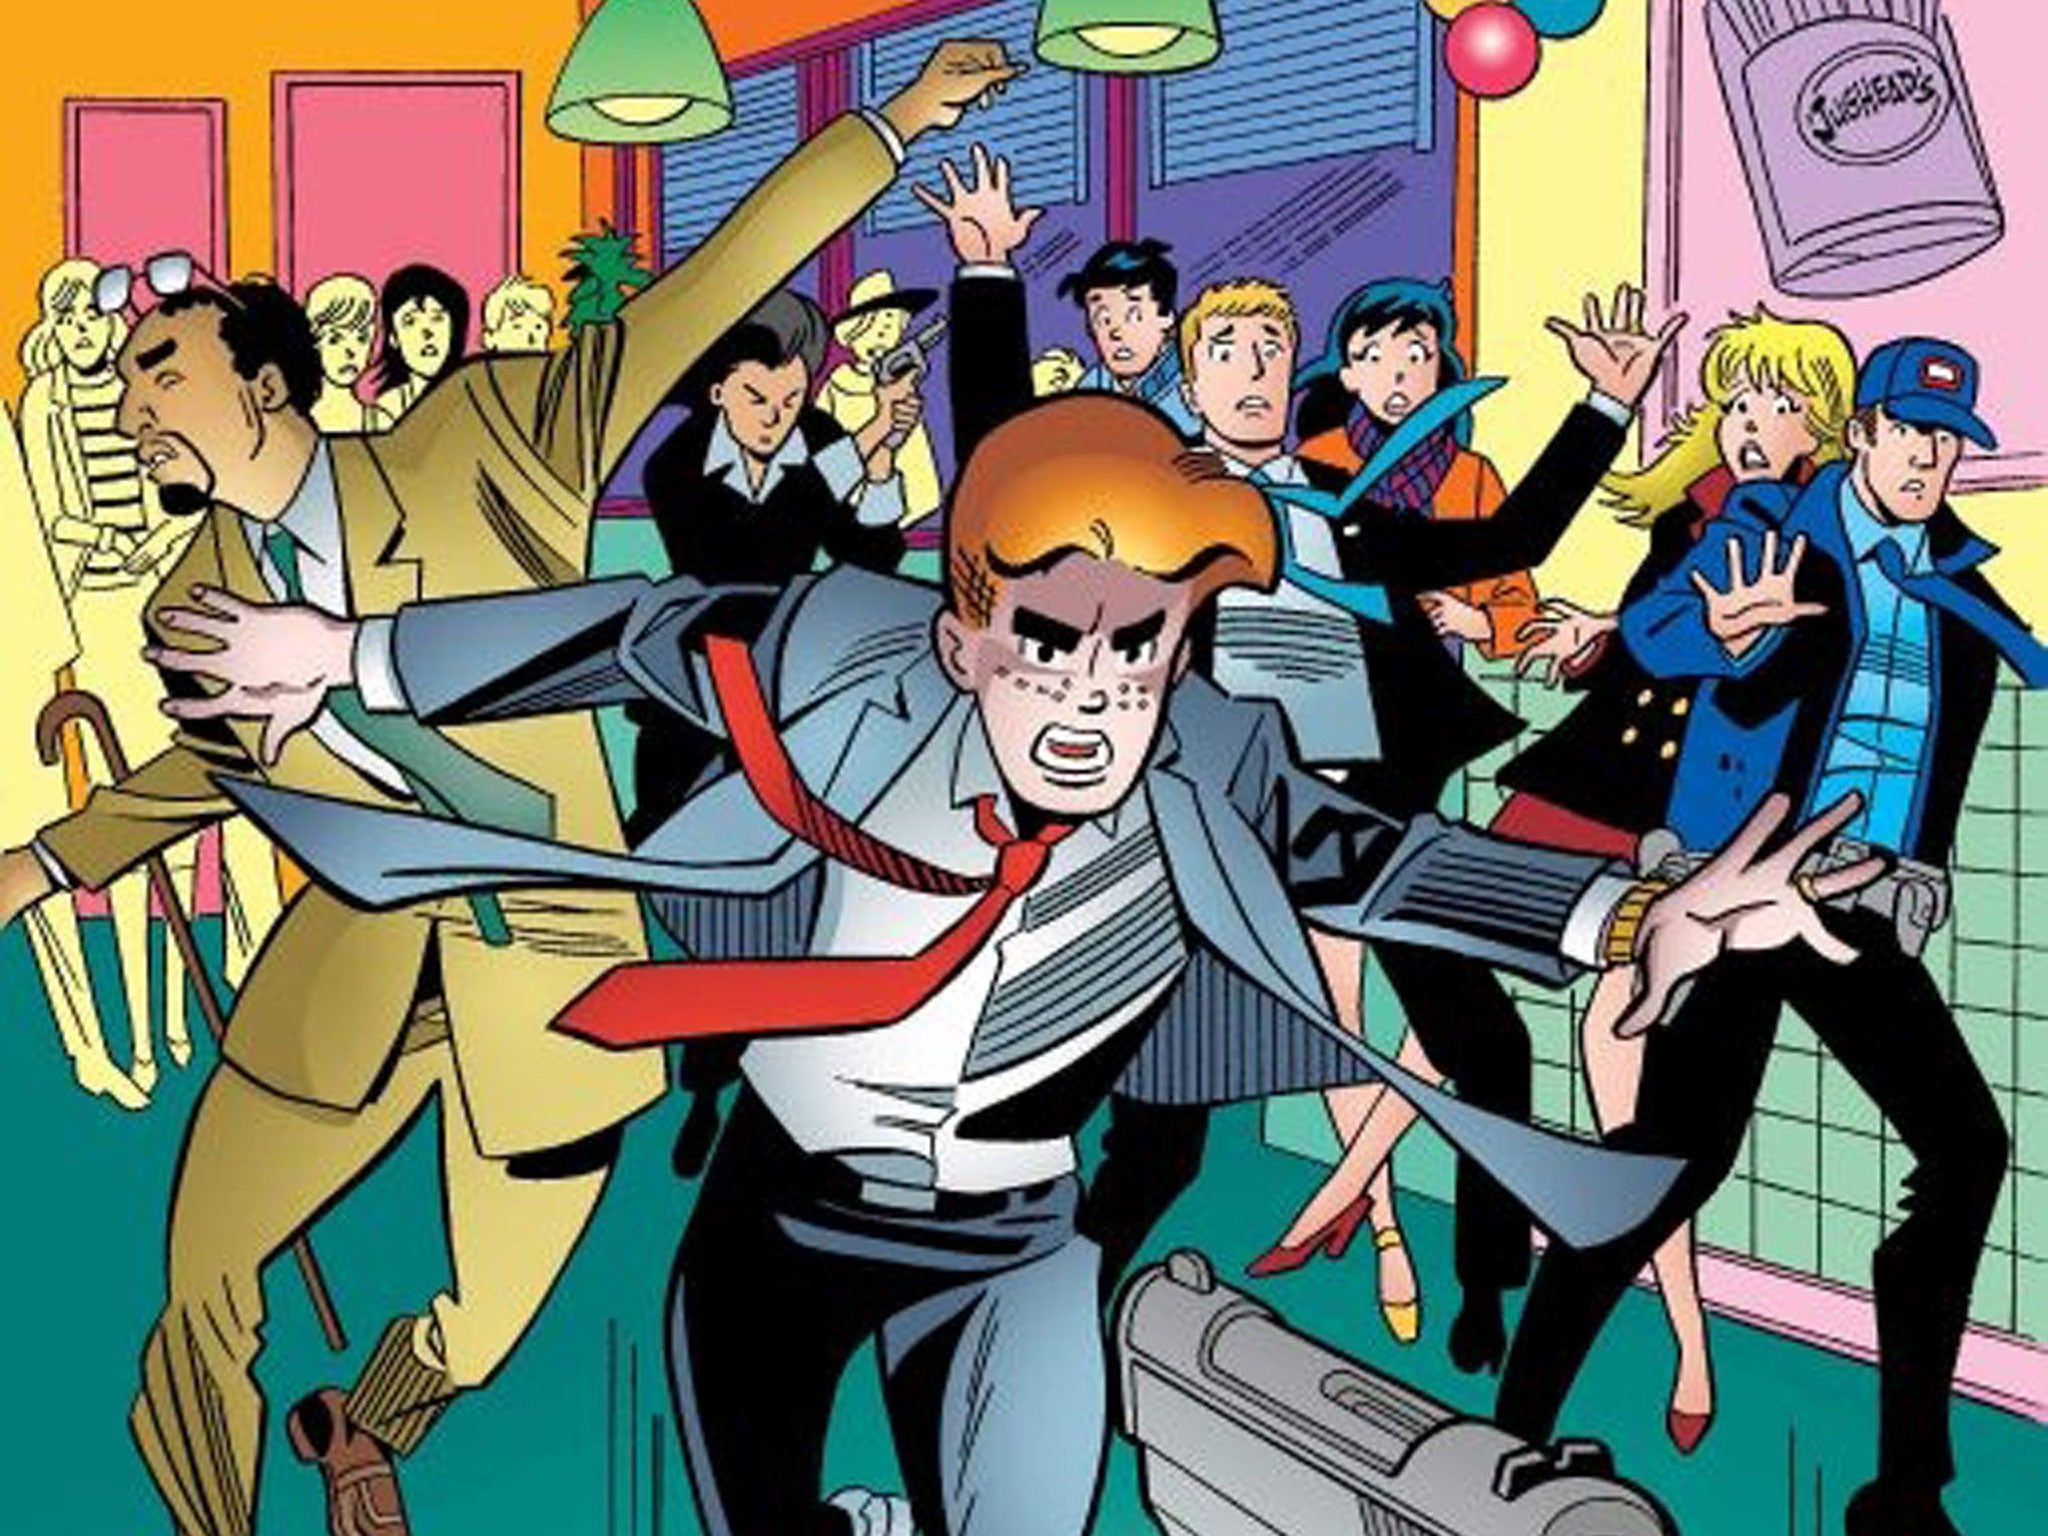 An image from an issue of "Life with Archie" is pictured courtesy of Archie Comics Publications. Archie Andrews, the redheaded American teenager in the "Archie" comic book series, will die taking a bullet protecting his gay friend in the issue that comes